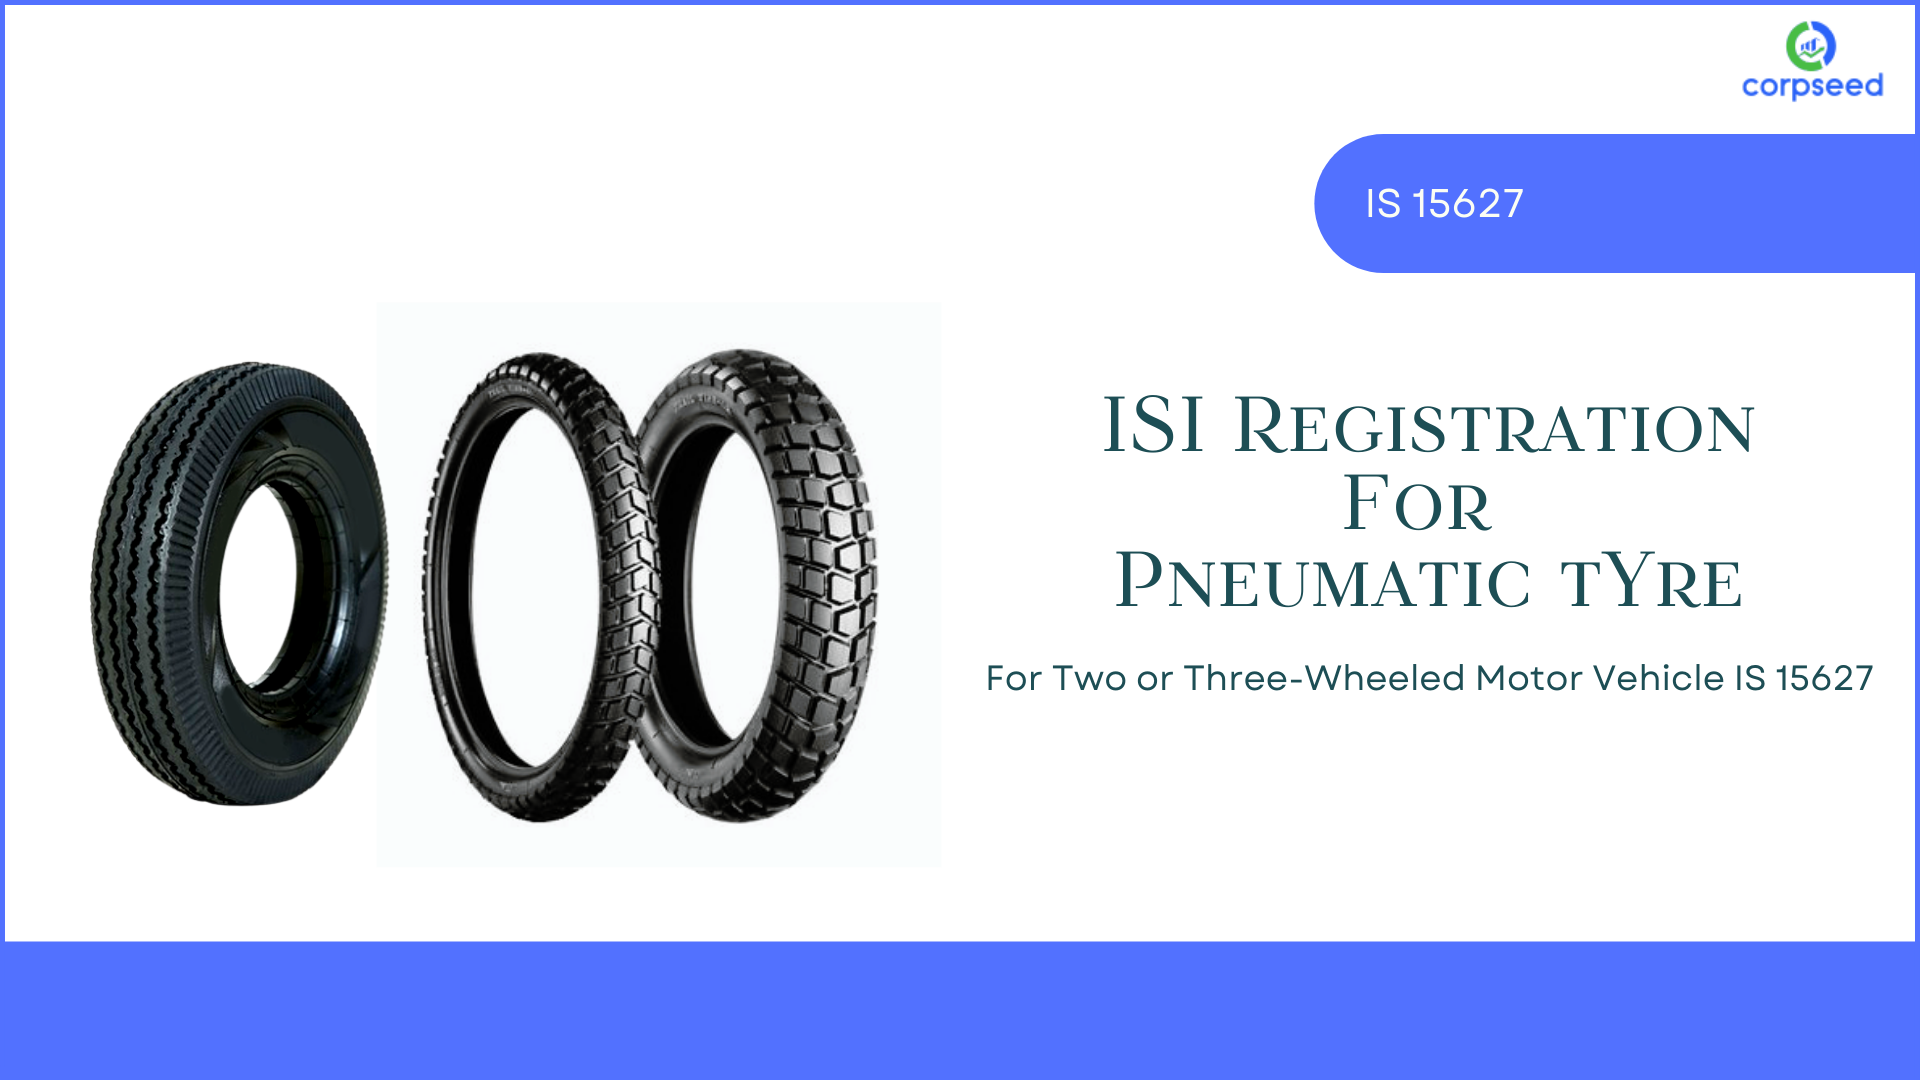 isi-registration-for-pneumatic-tyre-for-two-or-three-wheeled-motor-vehicle-is-15627_corpseed.png